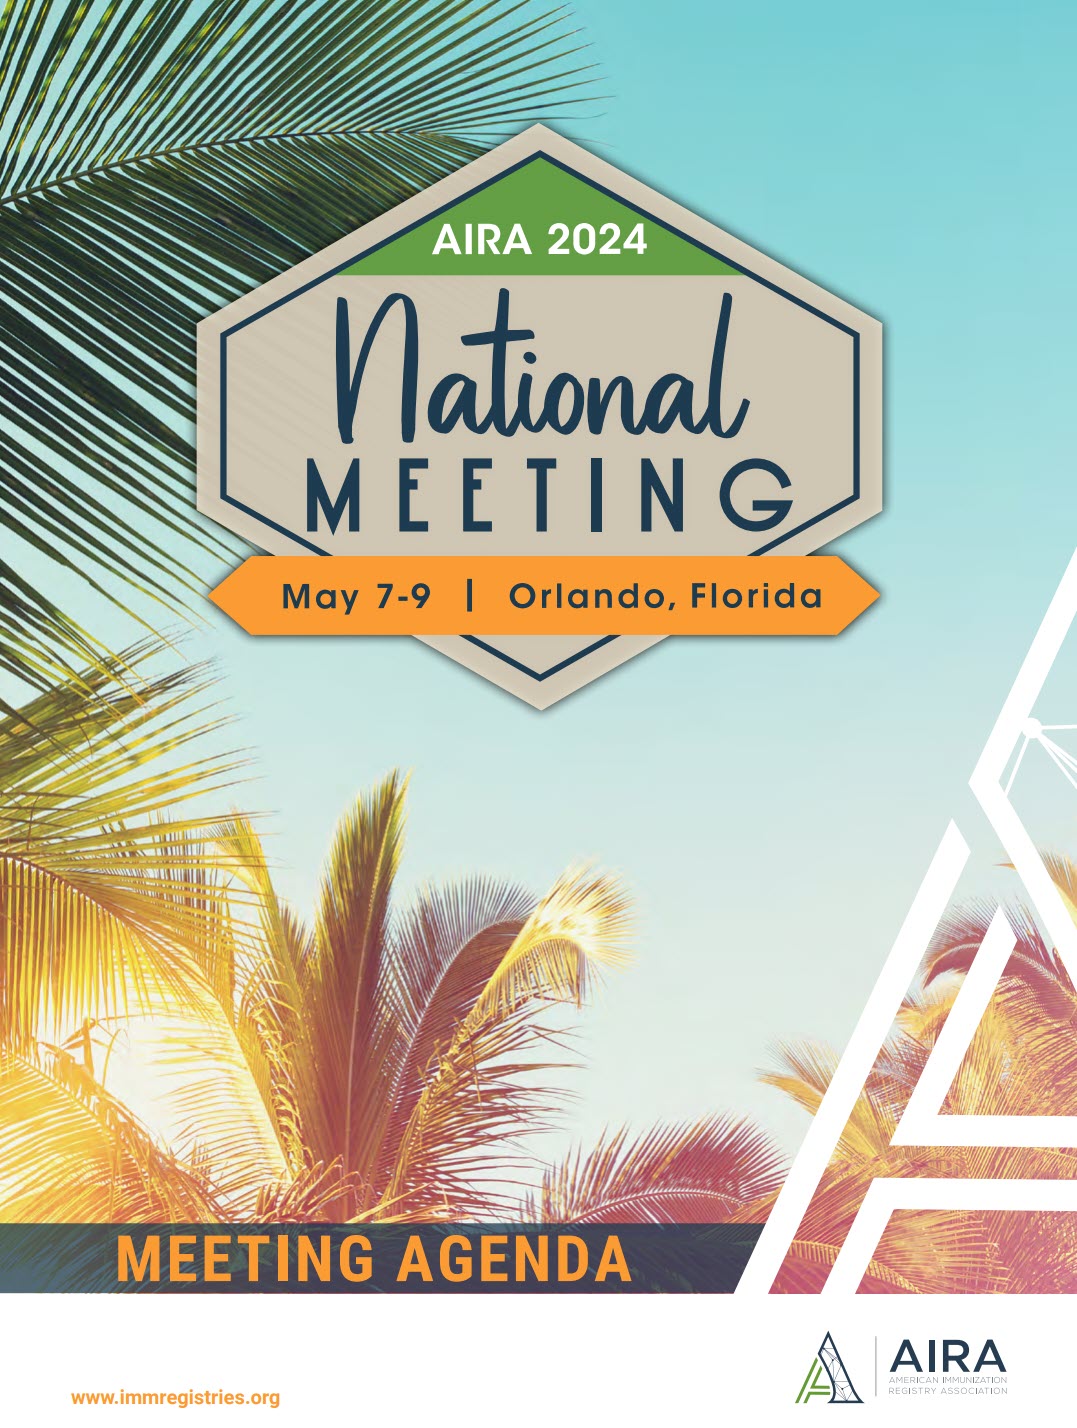 AIRA 2024 National Meeting with palm tree and sky background.